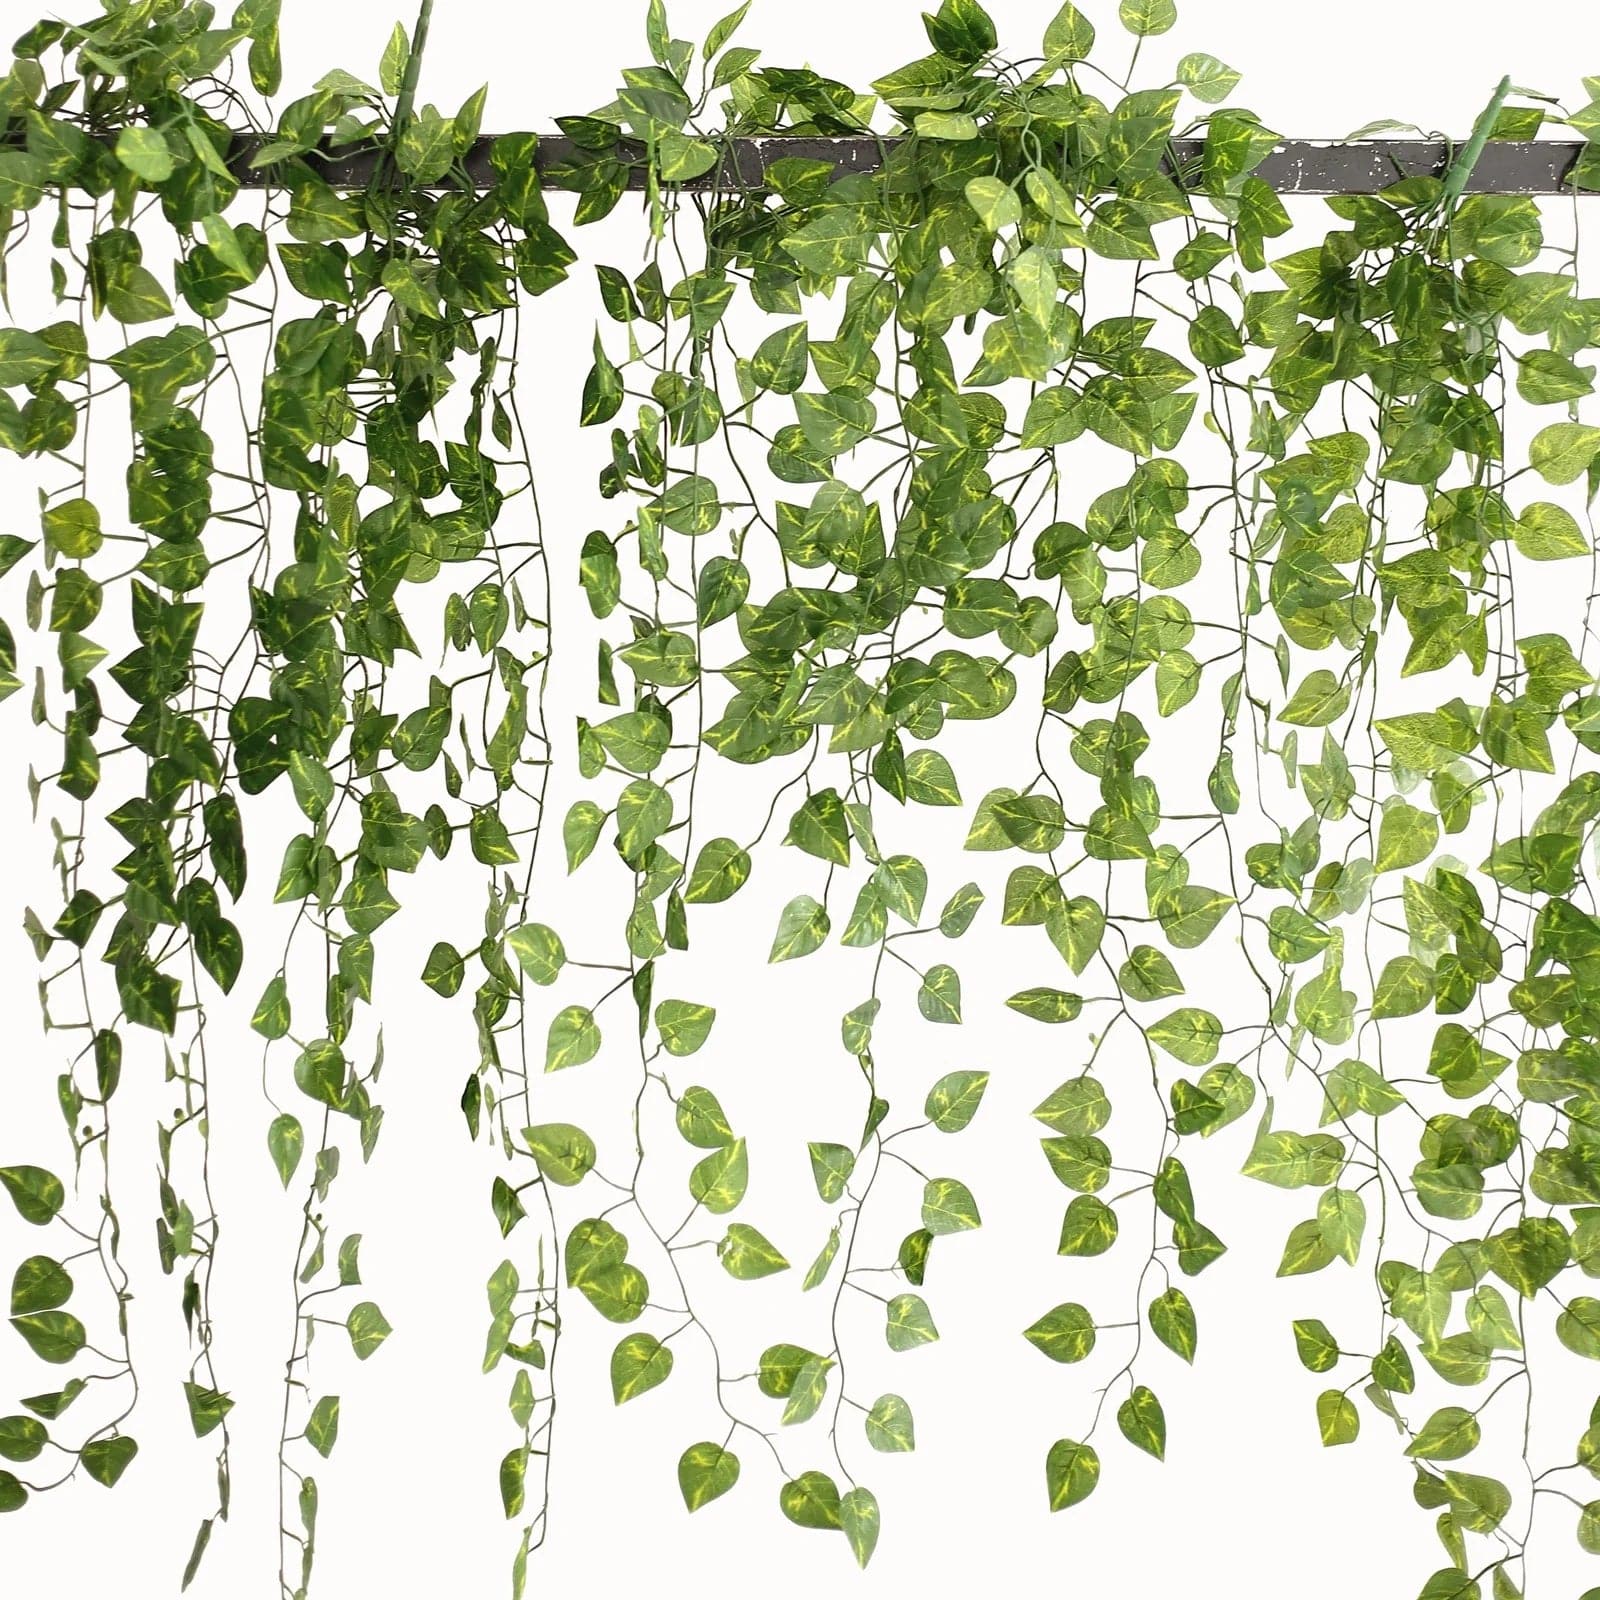 4 Green Artificial Ivy Leaves Garland Silk Photos Foliage Vines